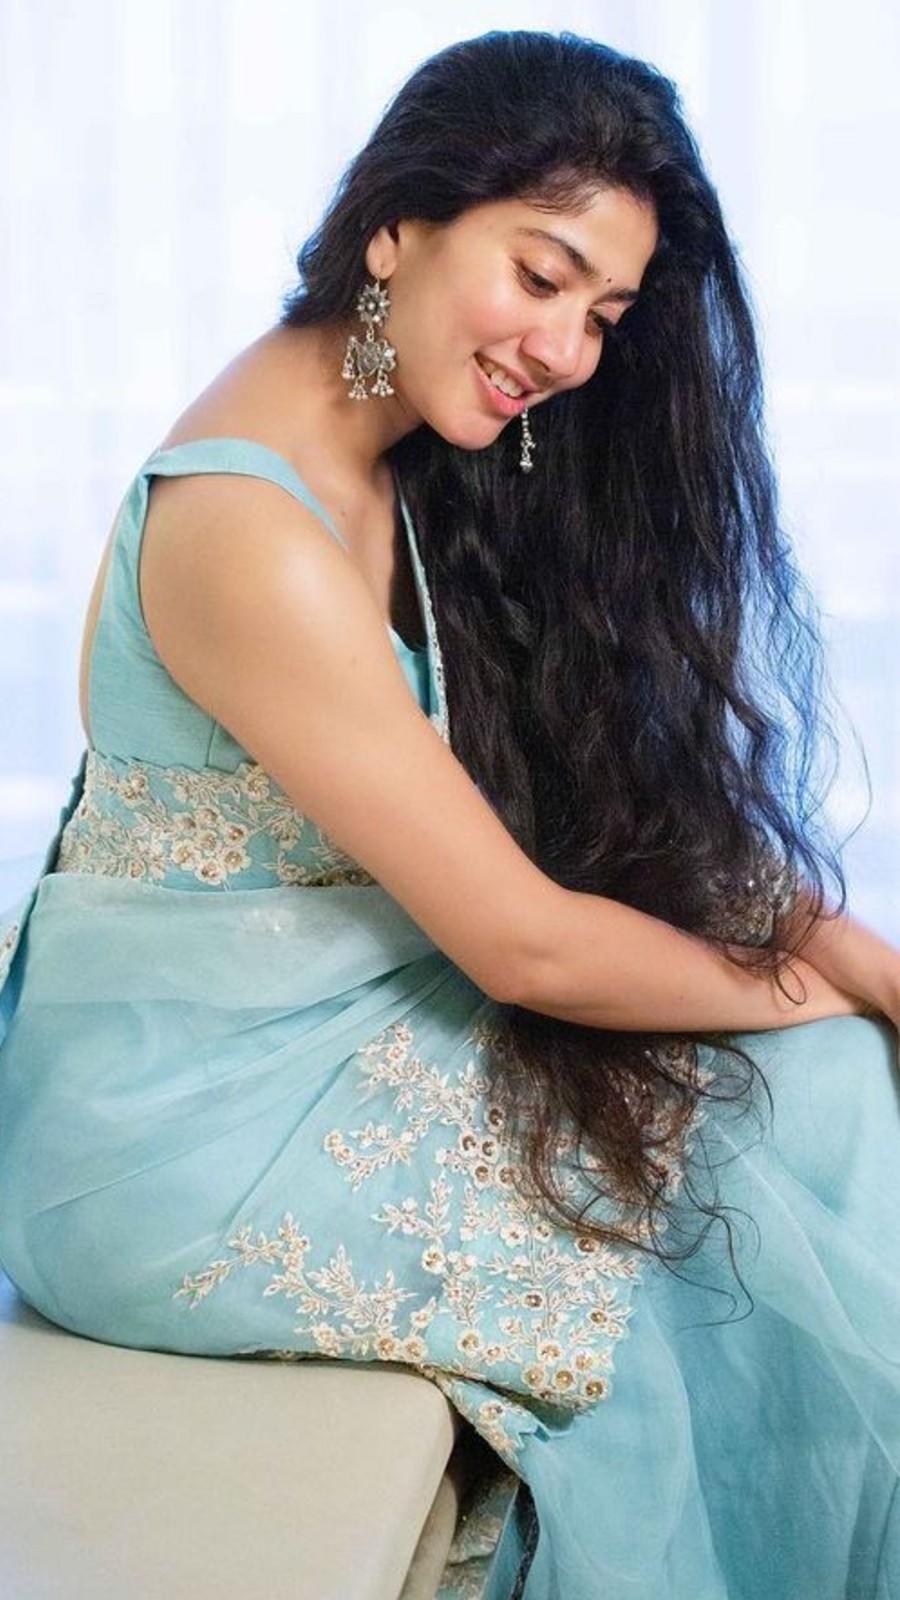 Proof that Sai Pallavi looks her best in sarees | Times of India